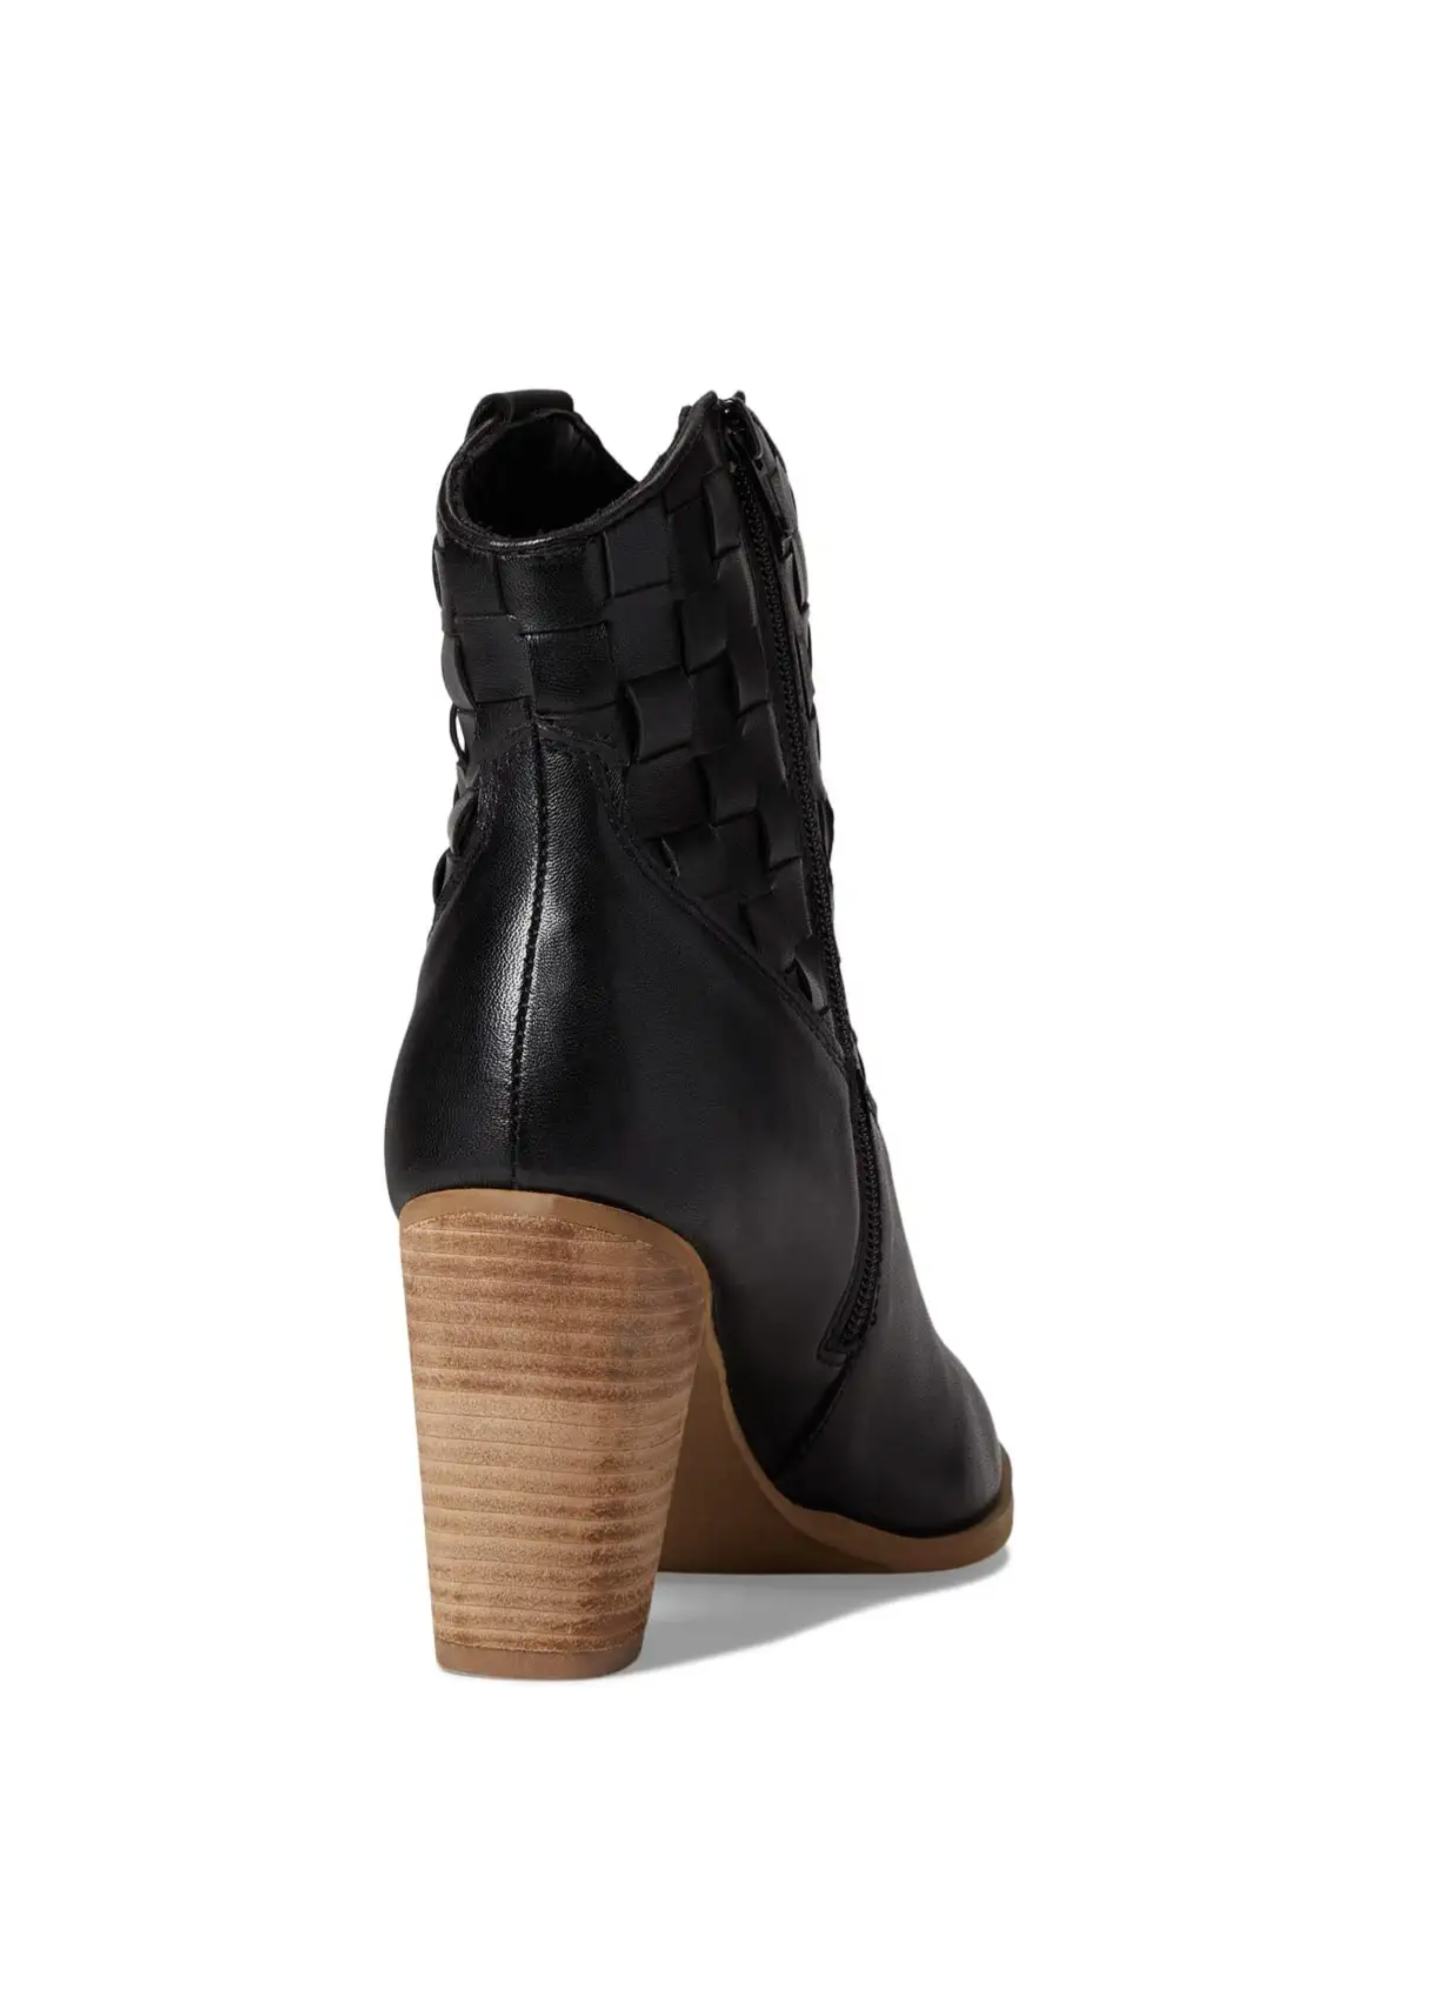 Dawn Basket Weave Ankle Boot in Black